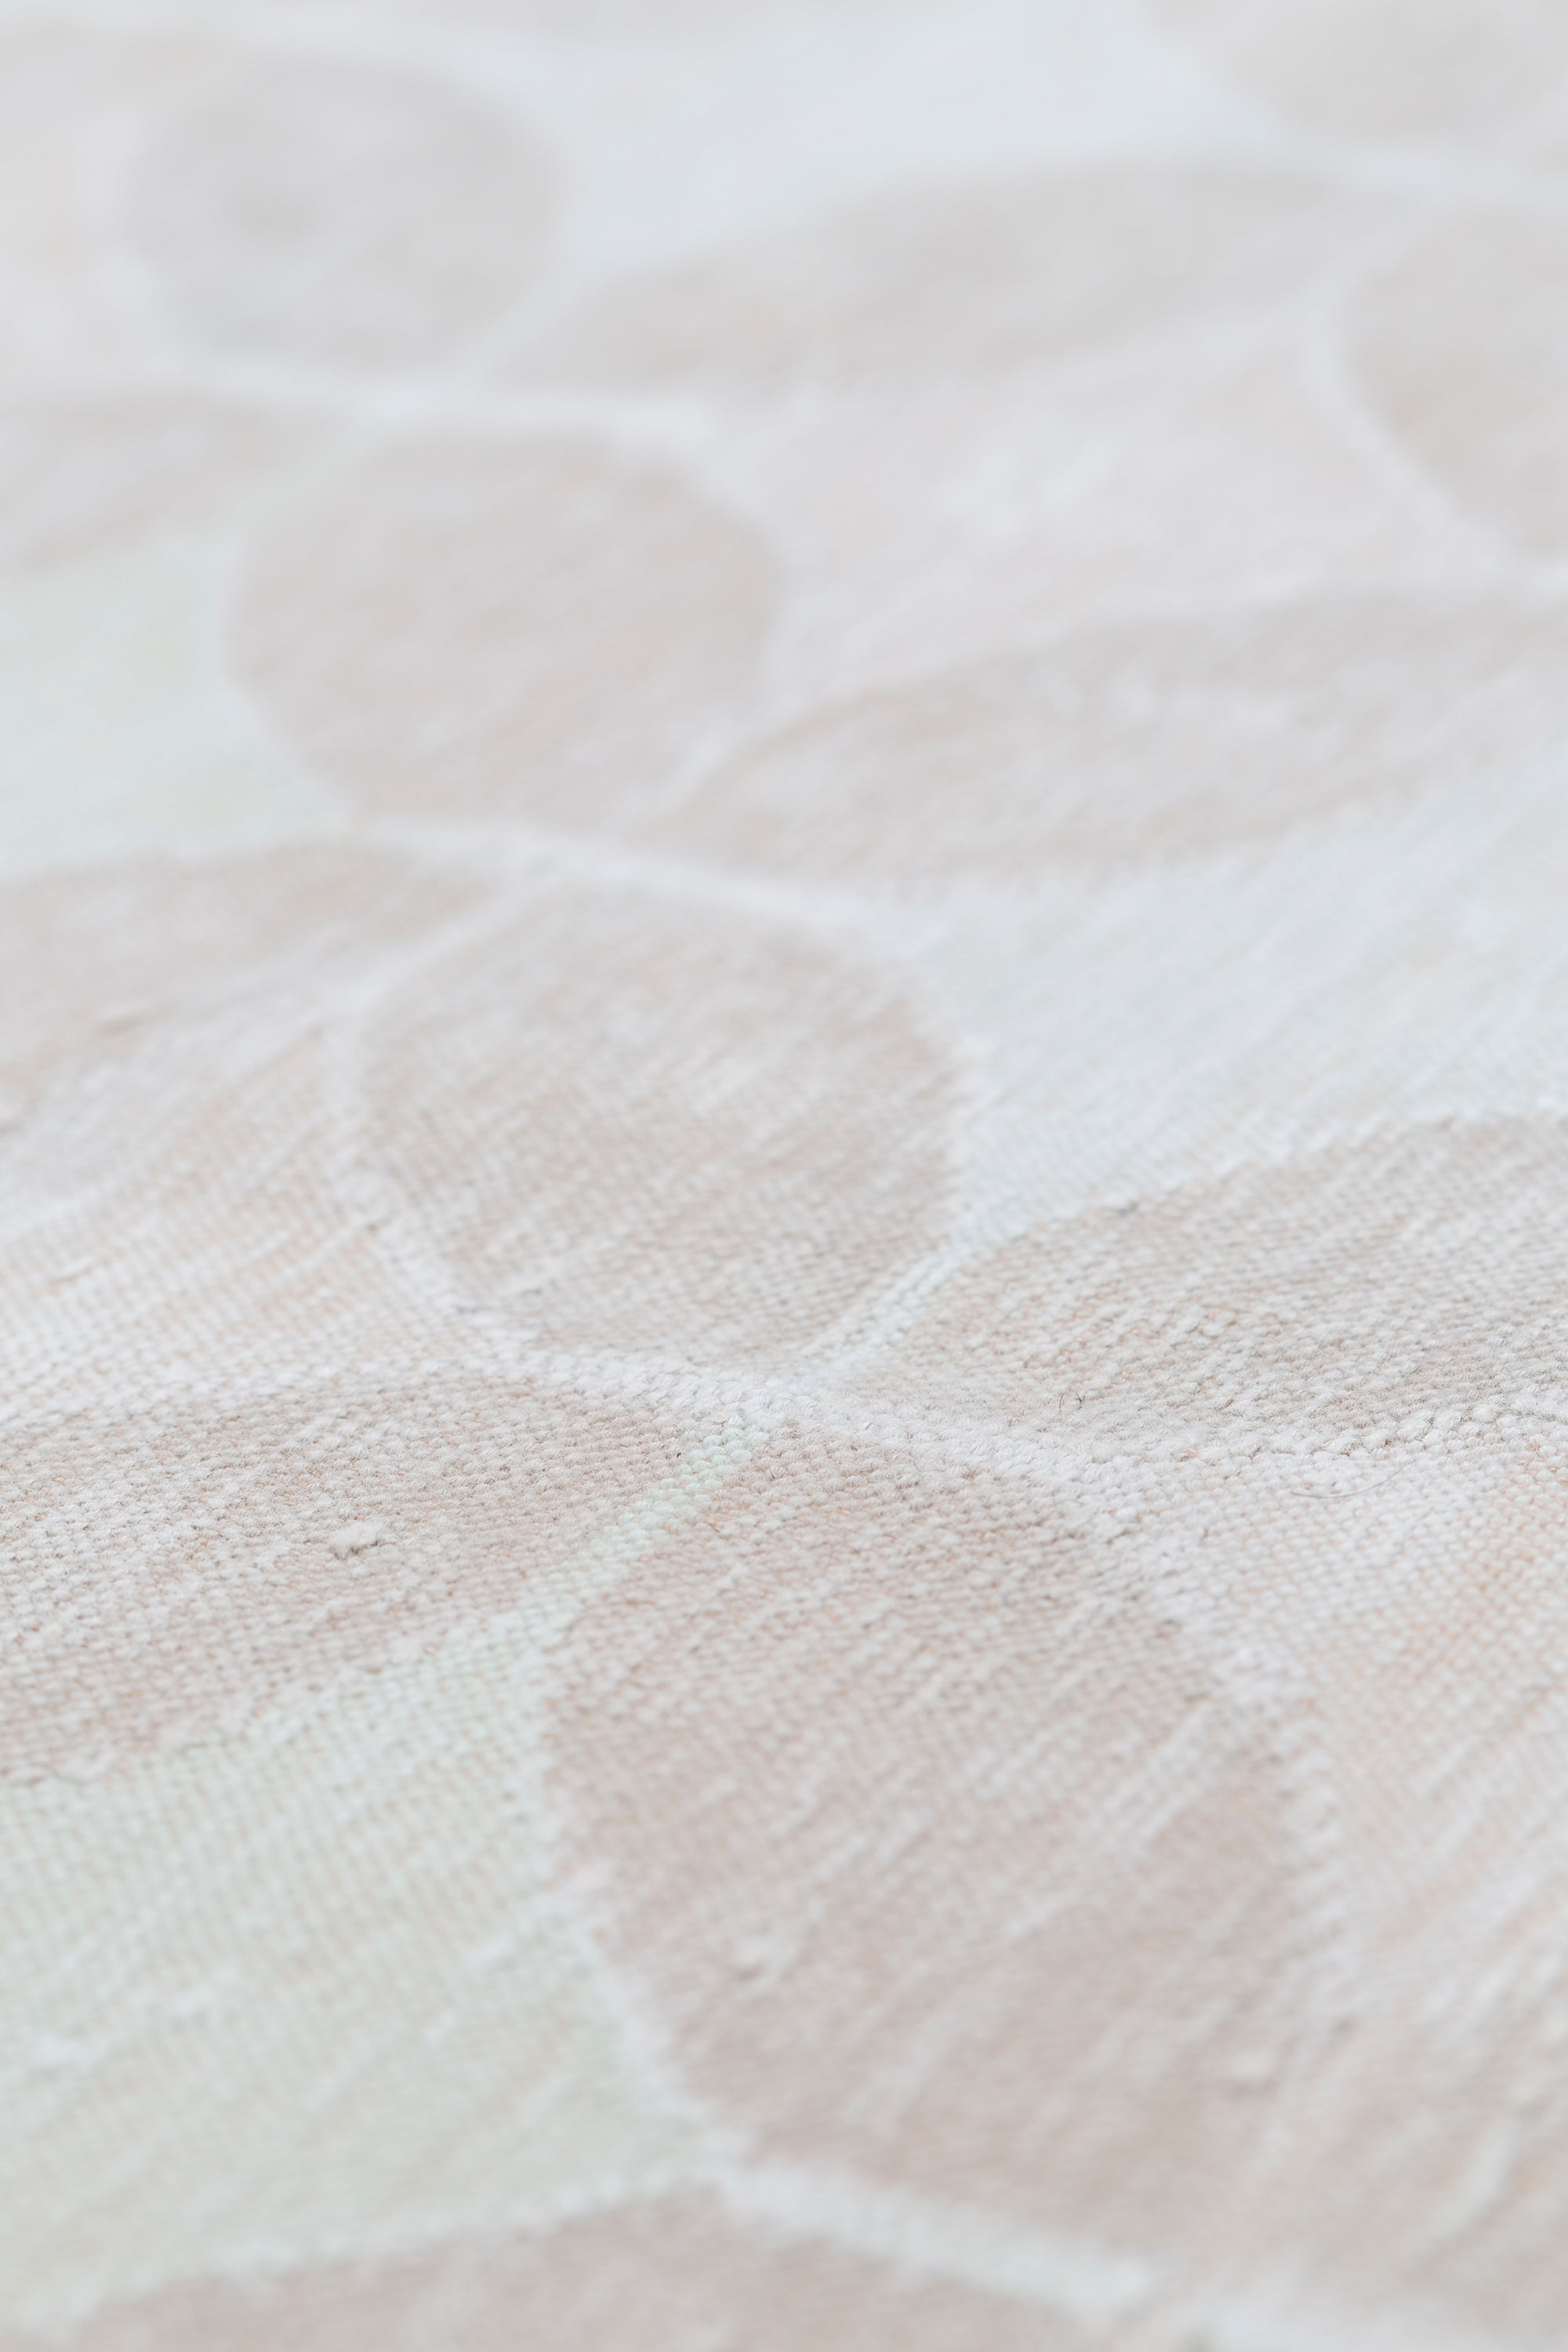 Detail of Alhambra Rug in Stonewash featuring pattern of linked circles that create a star like lattice in a range of pale pink tones a soft white field. 